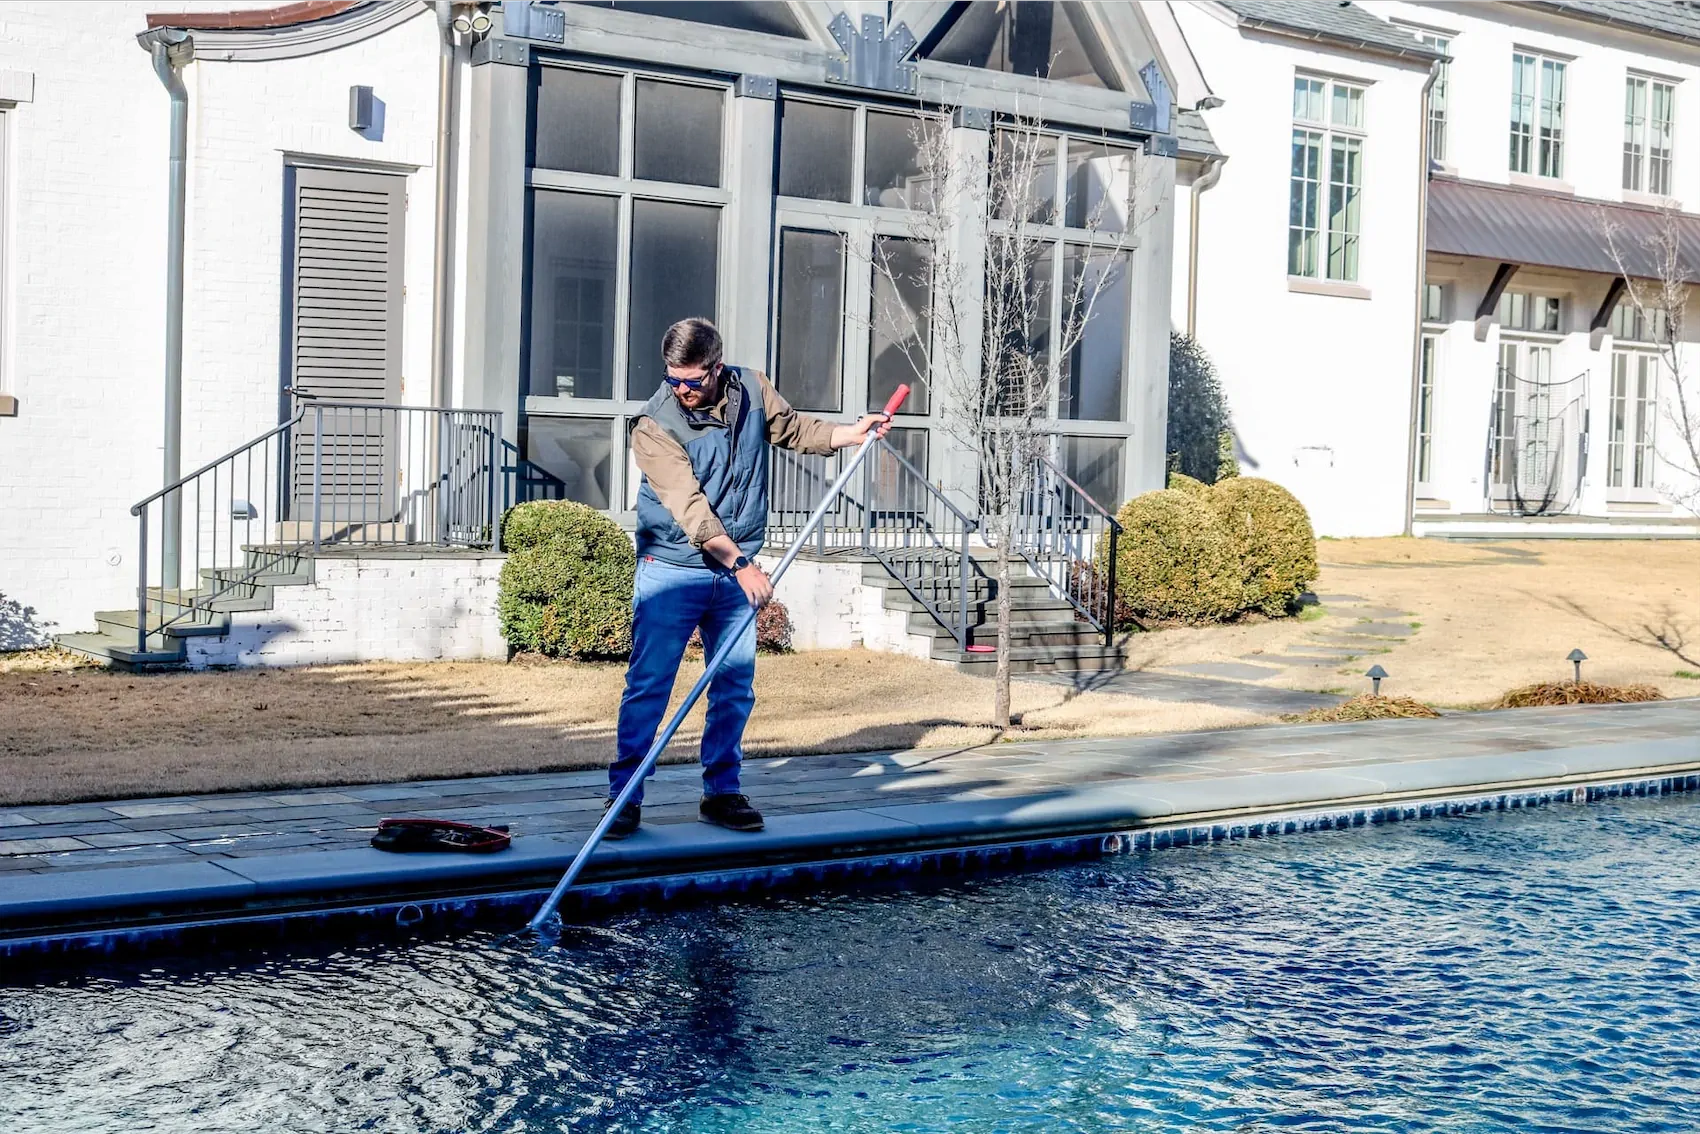 weekly pool maintenance service includes brush cleaning your pool